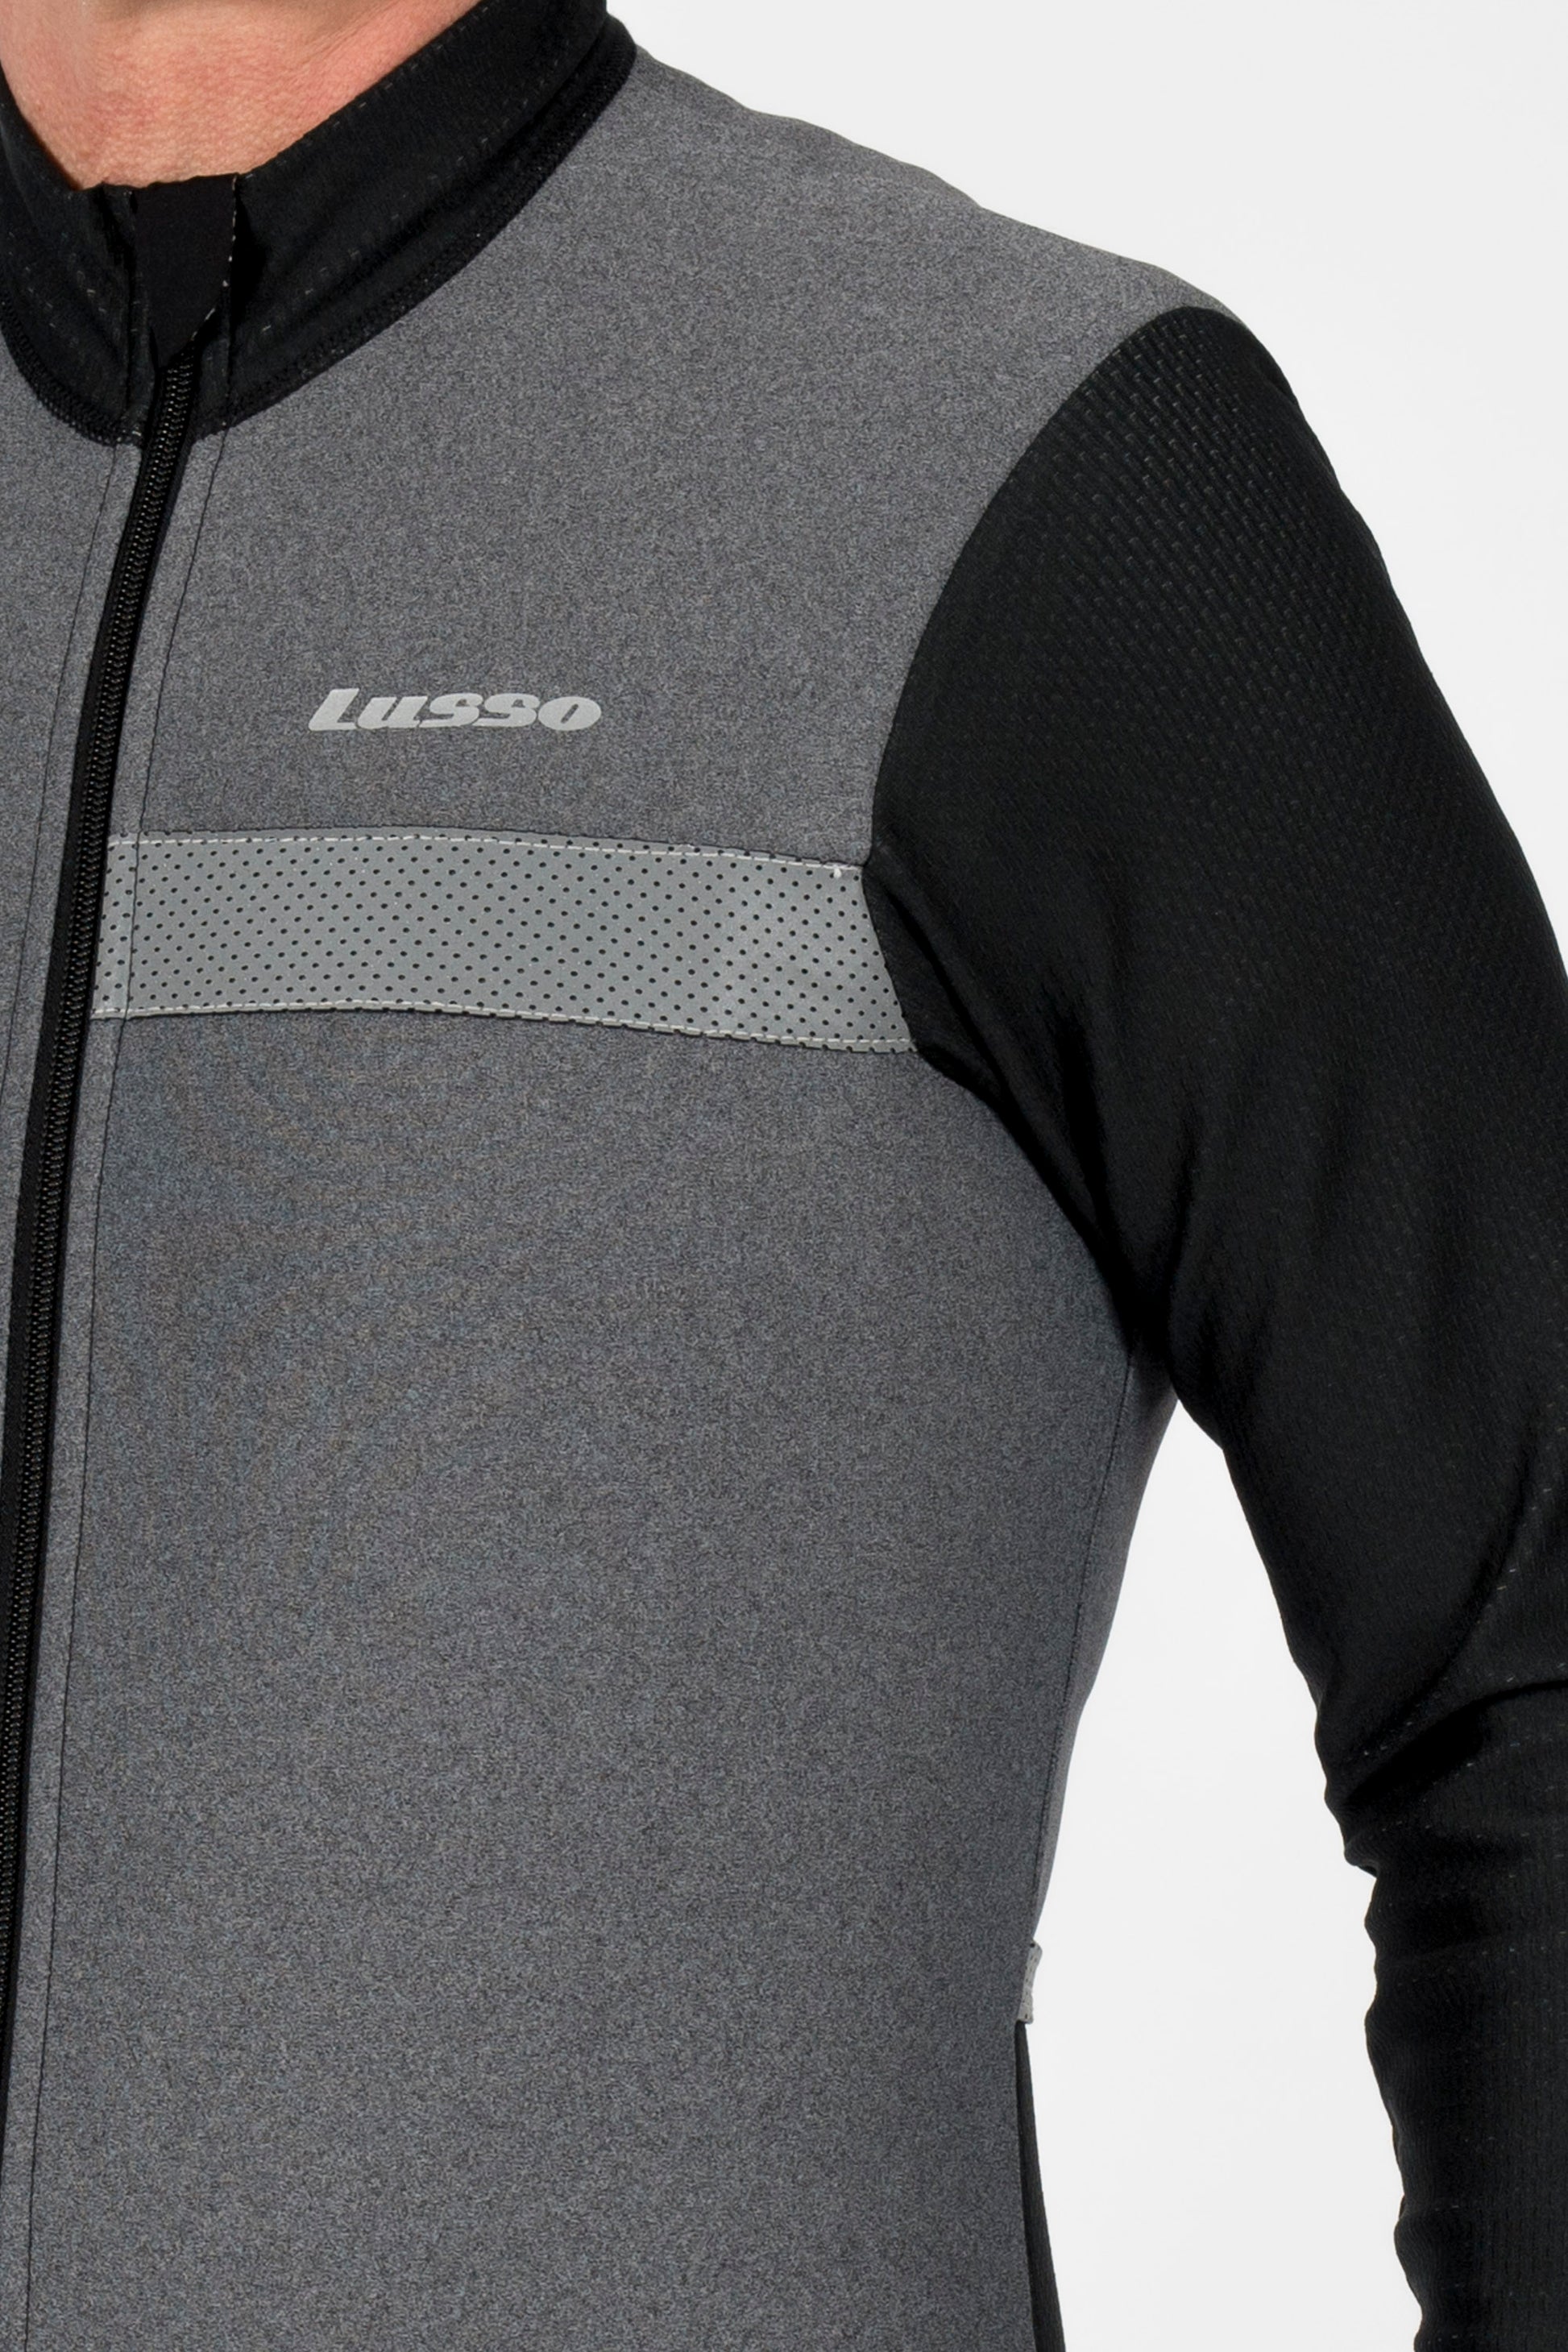 Grey Thermal Jersey - Lusso Cycle Wear